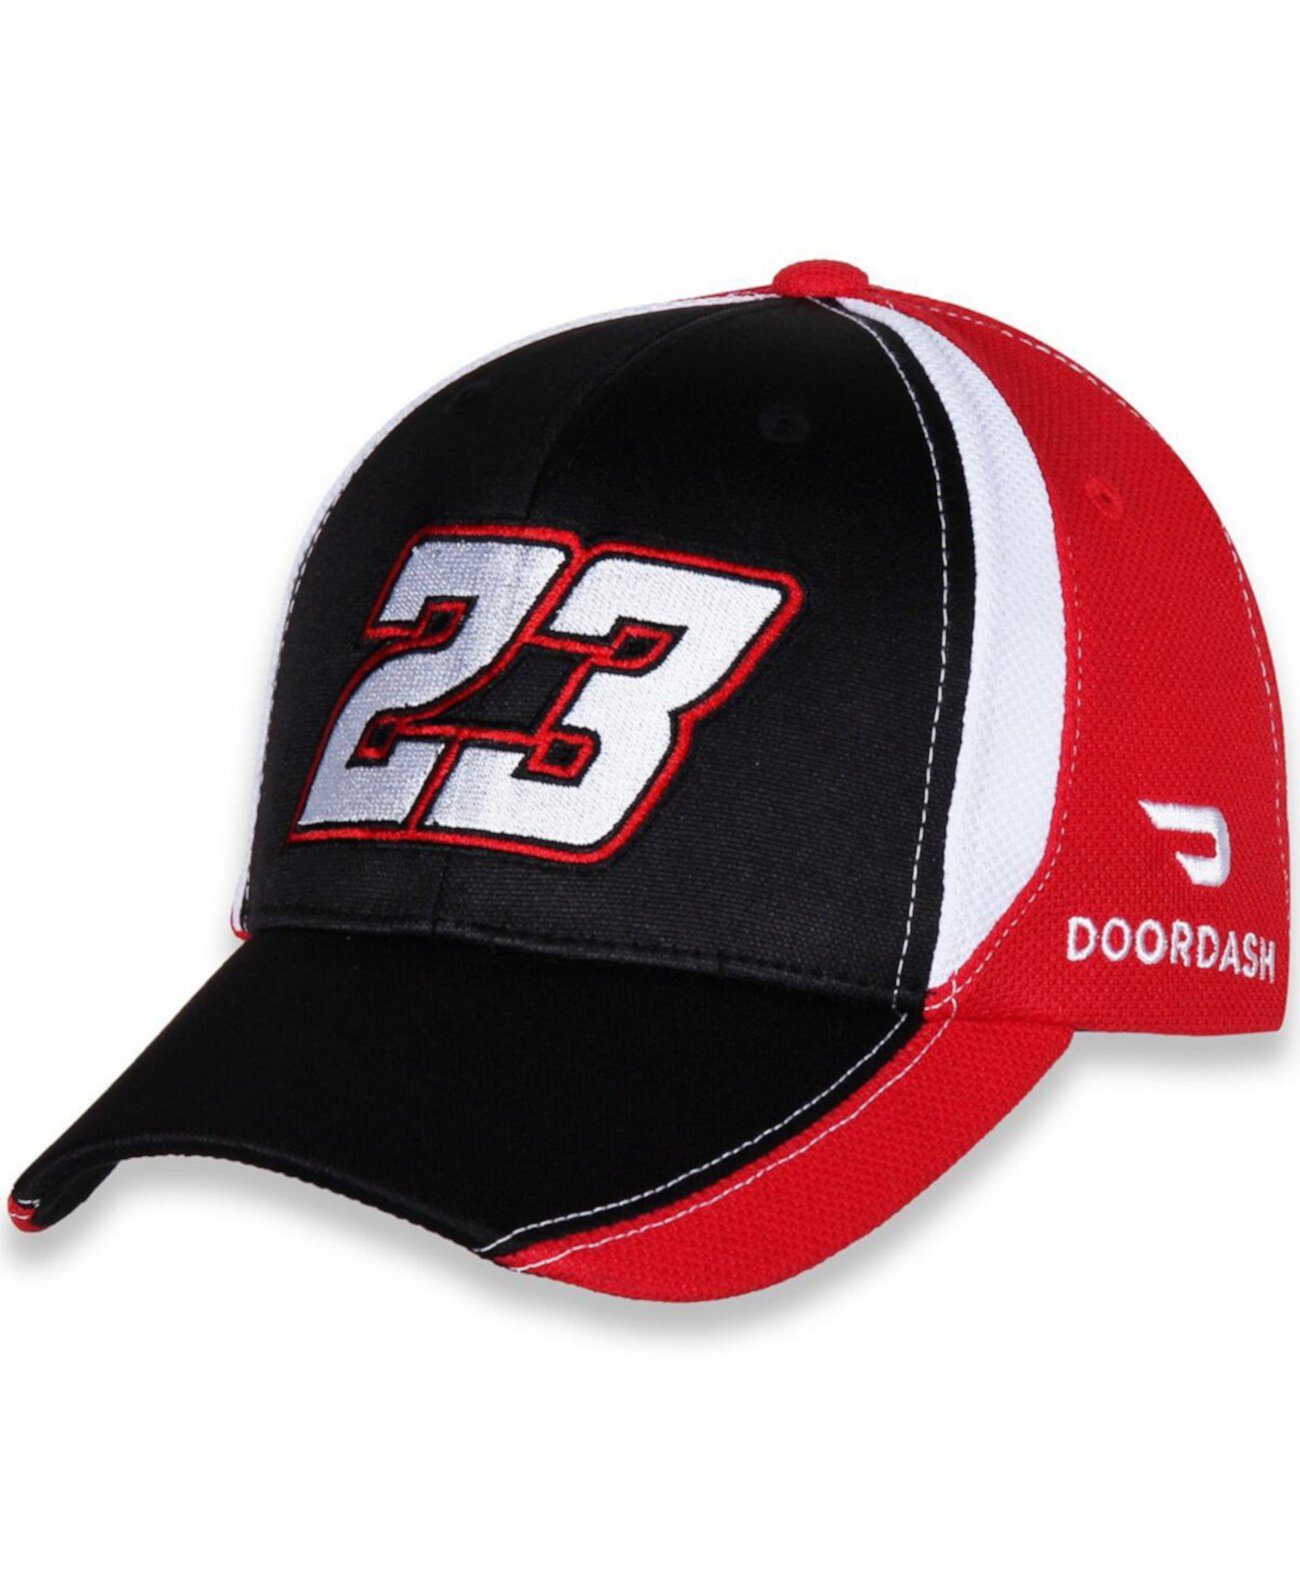 Men's Checkered Flag Black, Red Bubba Wallace DoorDash Number Performance Adjustable Hat Checkered Flag Sports